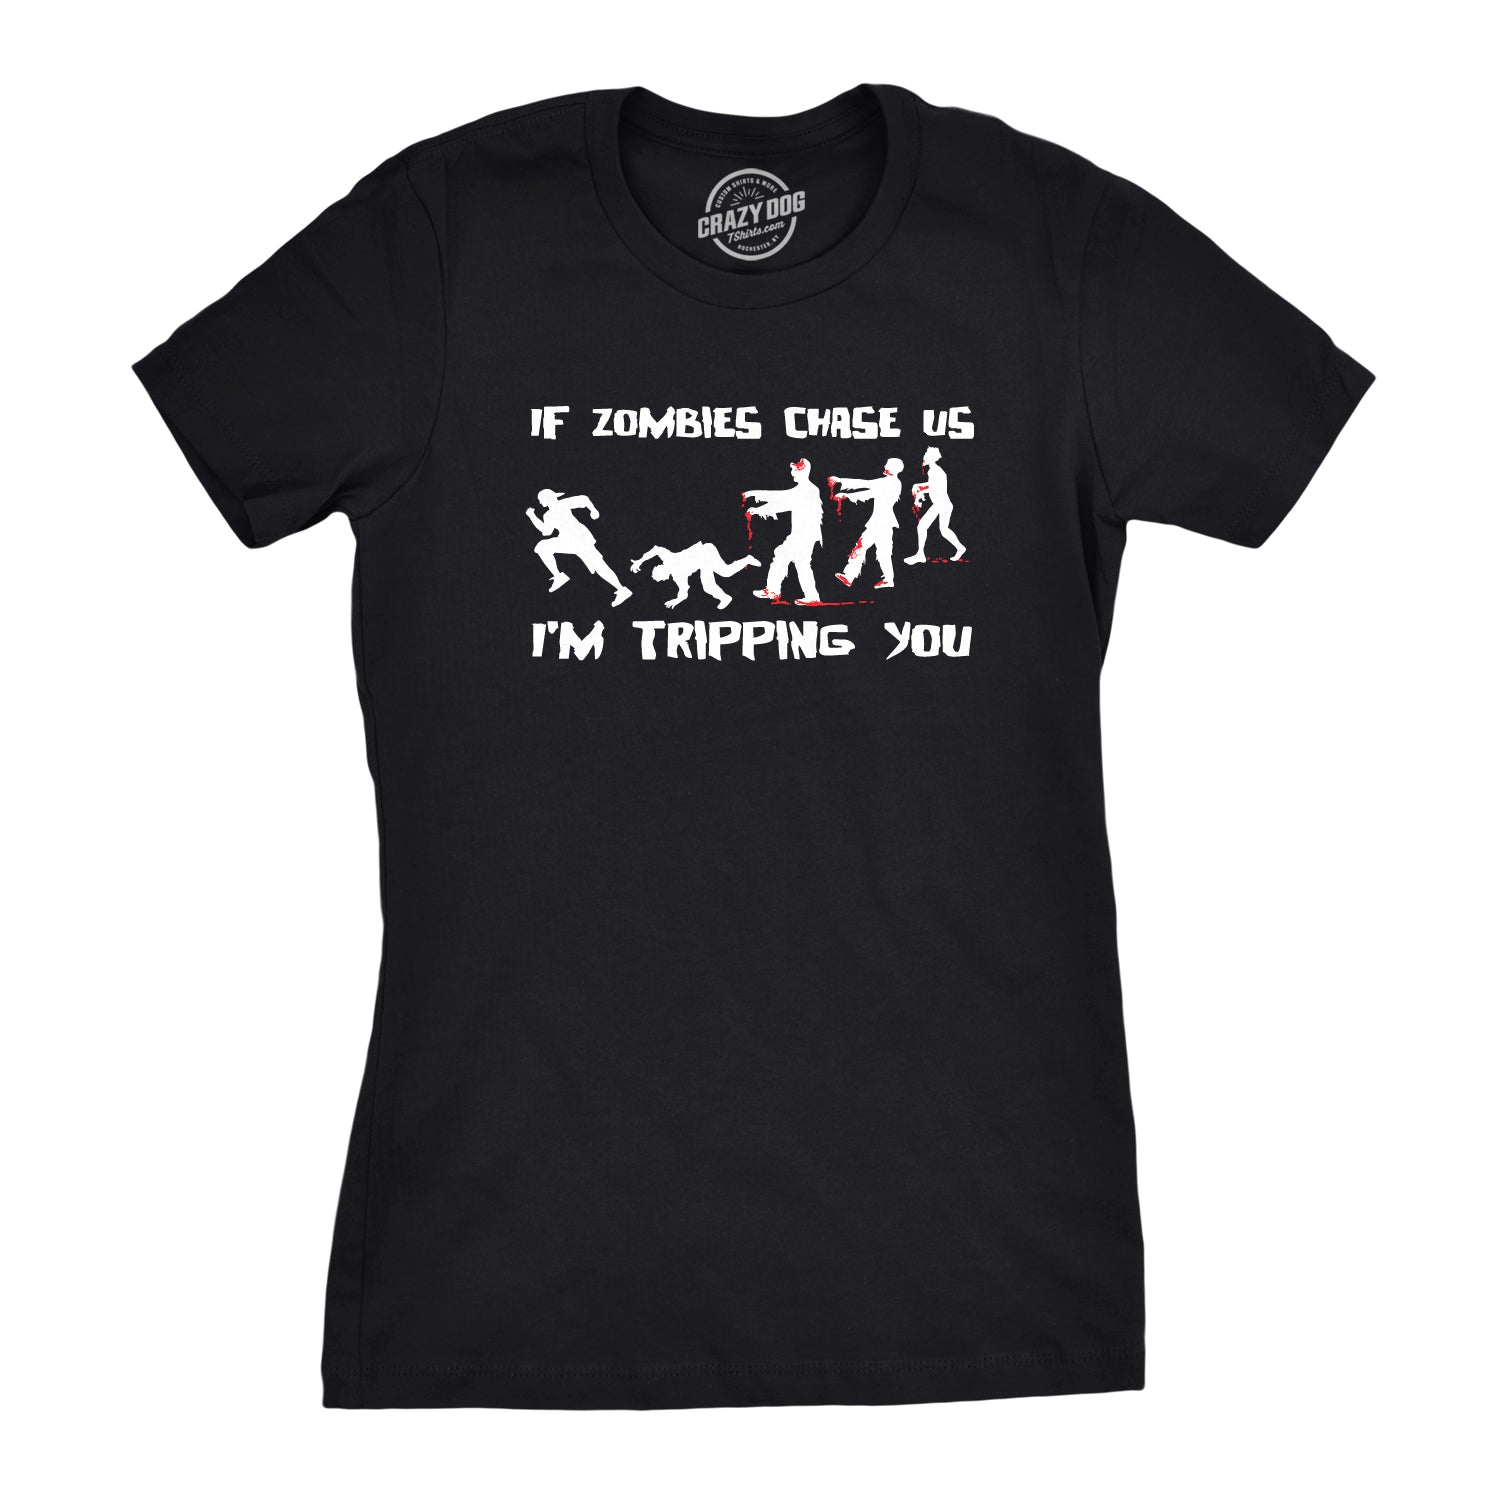 Funny Black If Zombies Chase Us I'm Tripping You Womens T Shirt Nerdy Halloween zombie sarcastic Tee